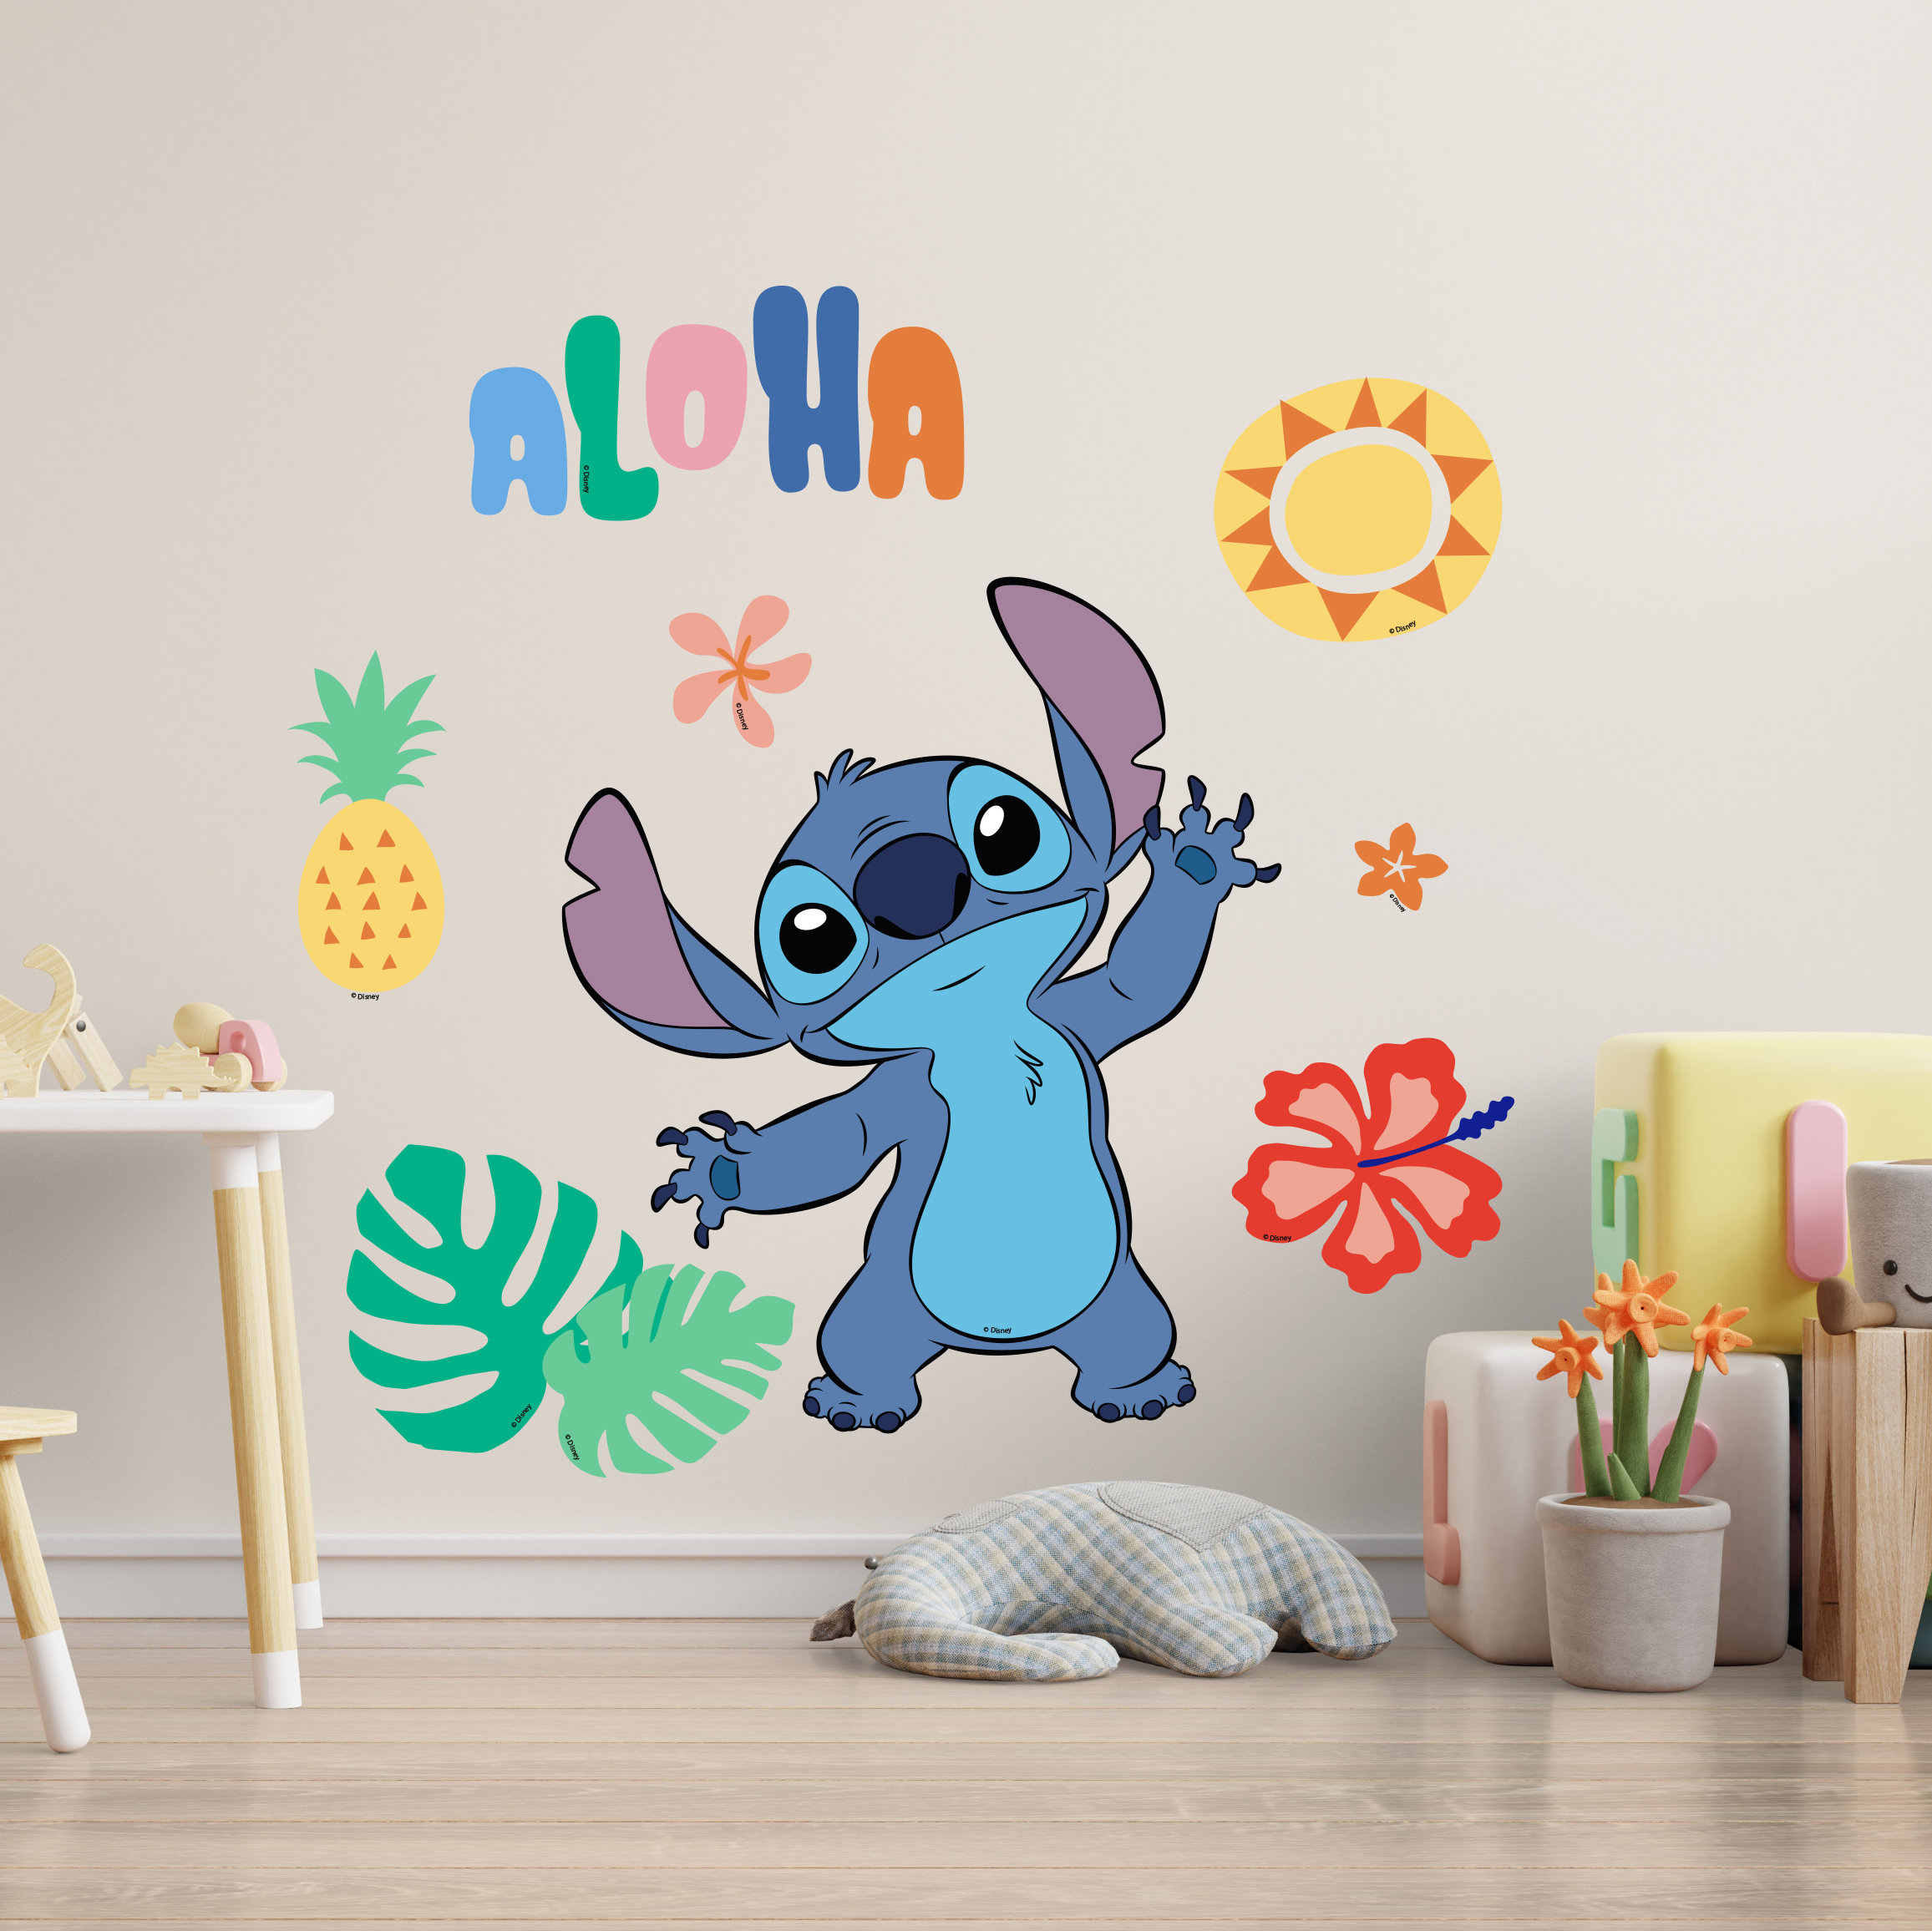  AOLIGL Lilo and Stitch Wall Stickers Disney Cartoon Wall Decals  DIY Peel and Stick Vinyl Wall Decor for Kid Girls Boys Bedroom Living Room  House Fun (Size: 17.8×23.7 inch) : Baby